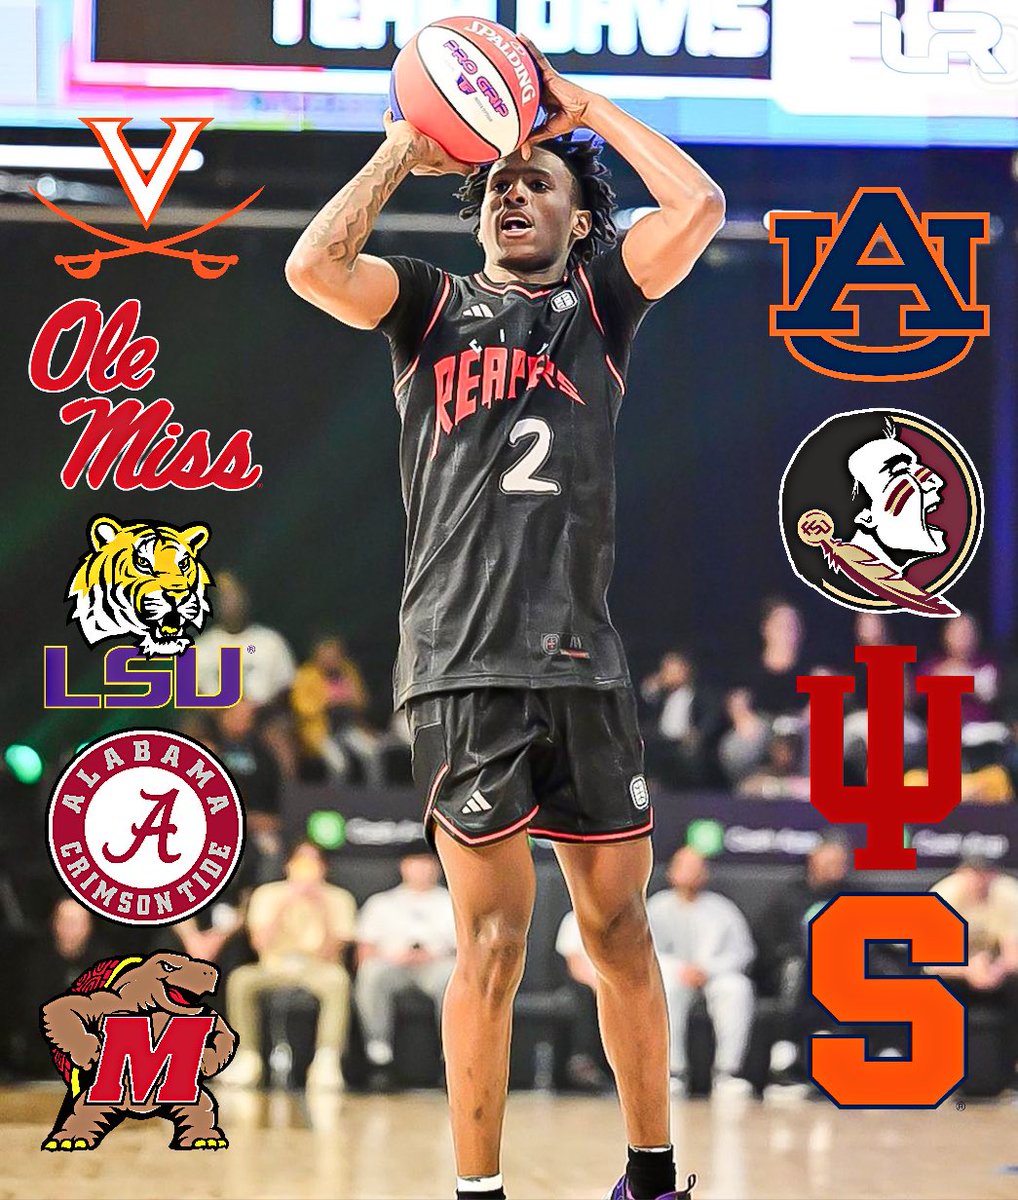 2025 4⭐️ Tyler Jackson (@yeadathype) is one of the top guard prospects in the ‘25 class. He tells @LeagueRDY he’s hearing the most from these programs: Maryland Syracuse Indiana Auburn Ole Miss Alabama Virginia LSU Florida State Jackson is an aggressive, attacking guard with